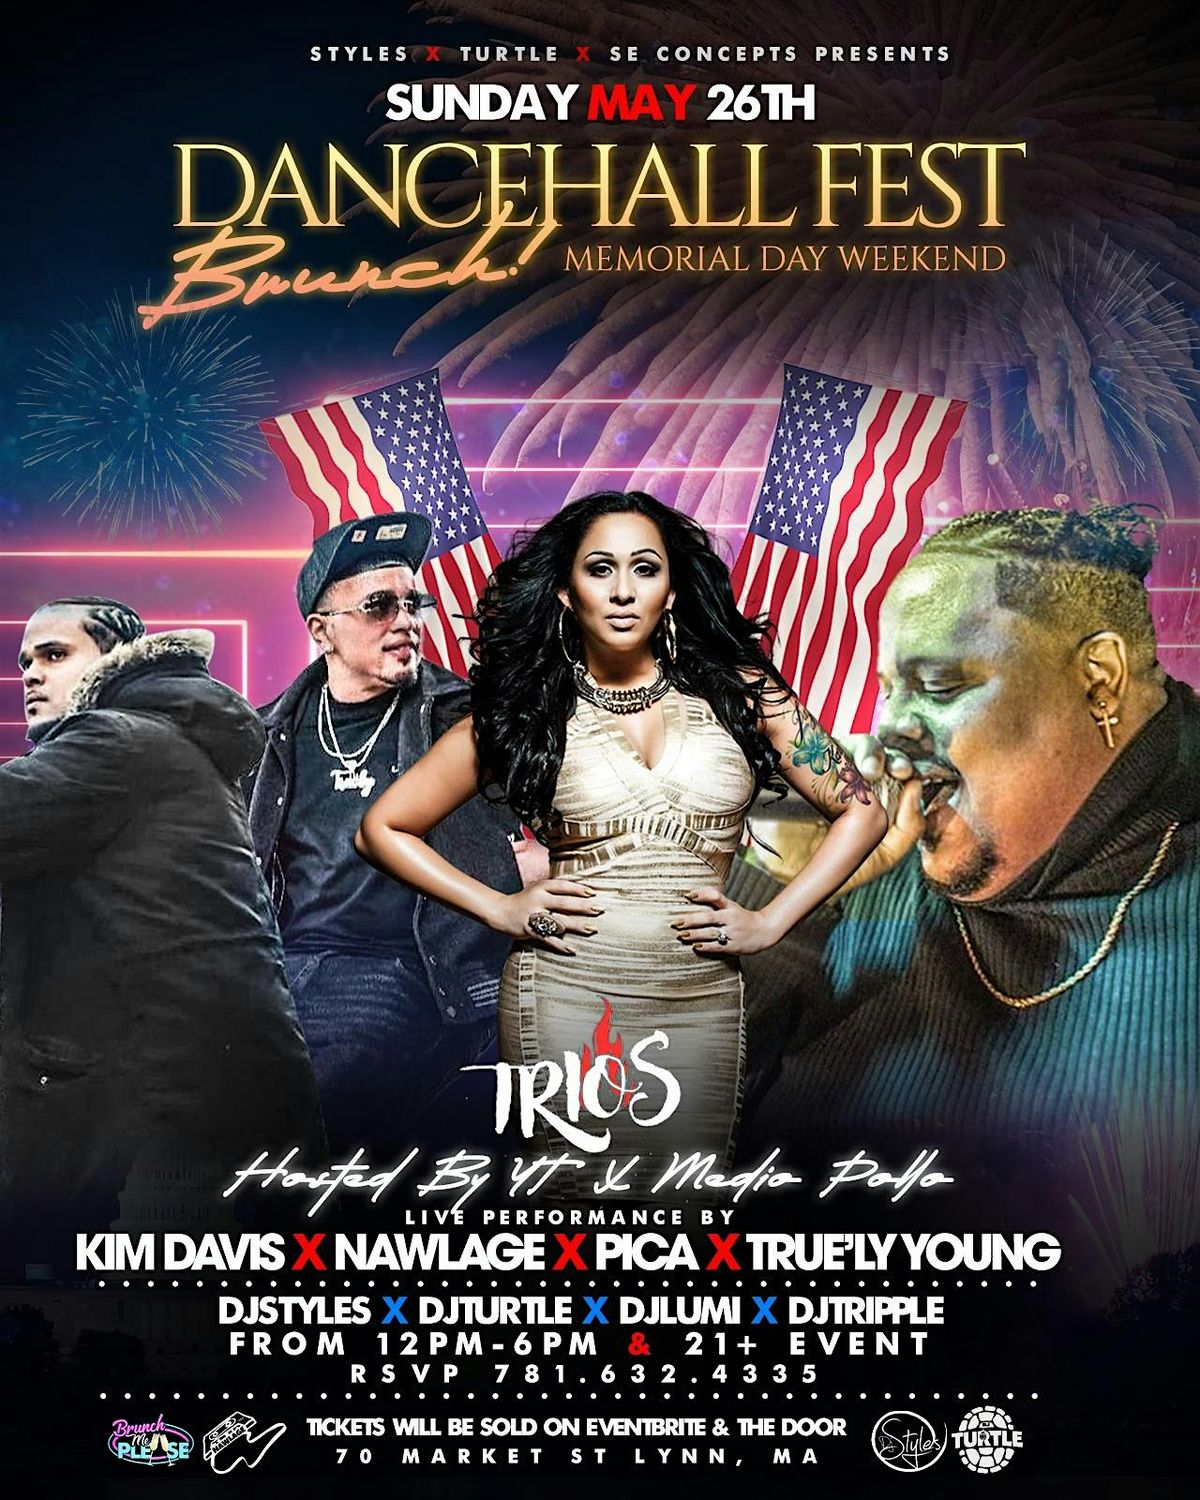 Dancehall Fest Brunch 2 [May 26th] Kim Davis, Pica, True'ly Young & Nawlage